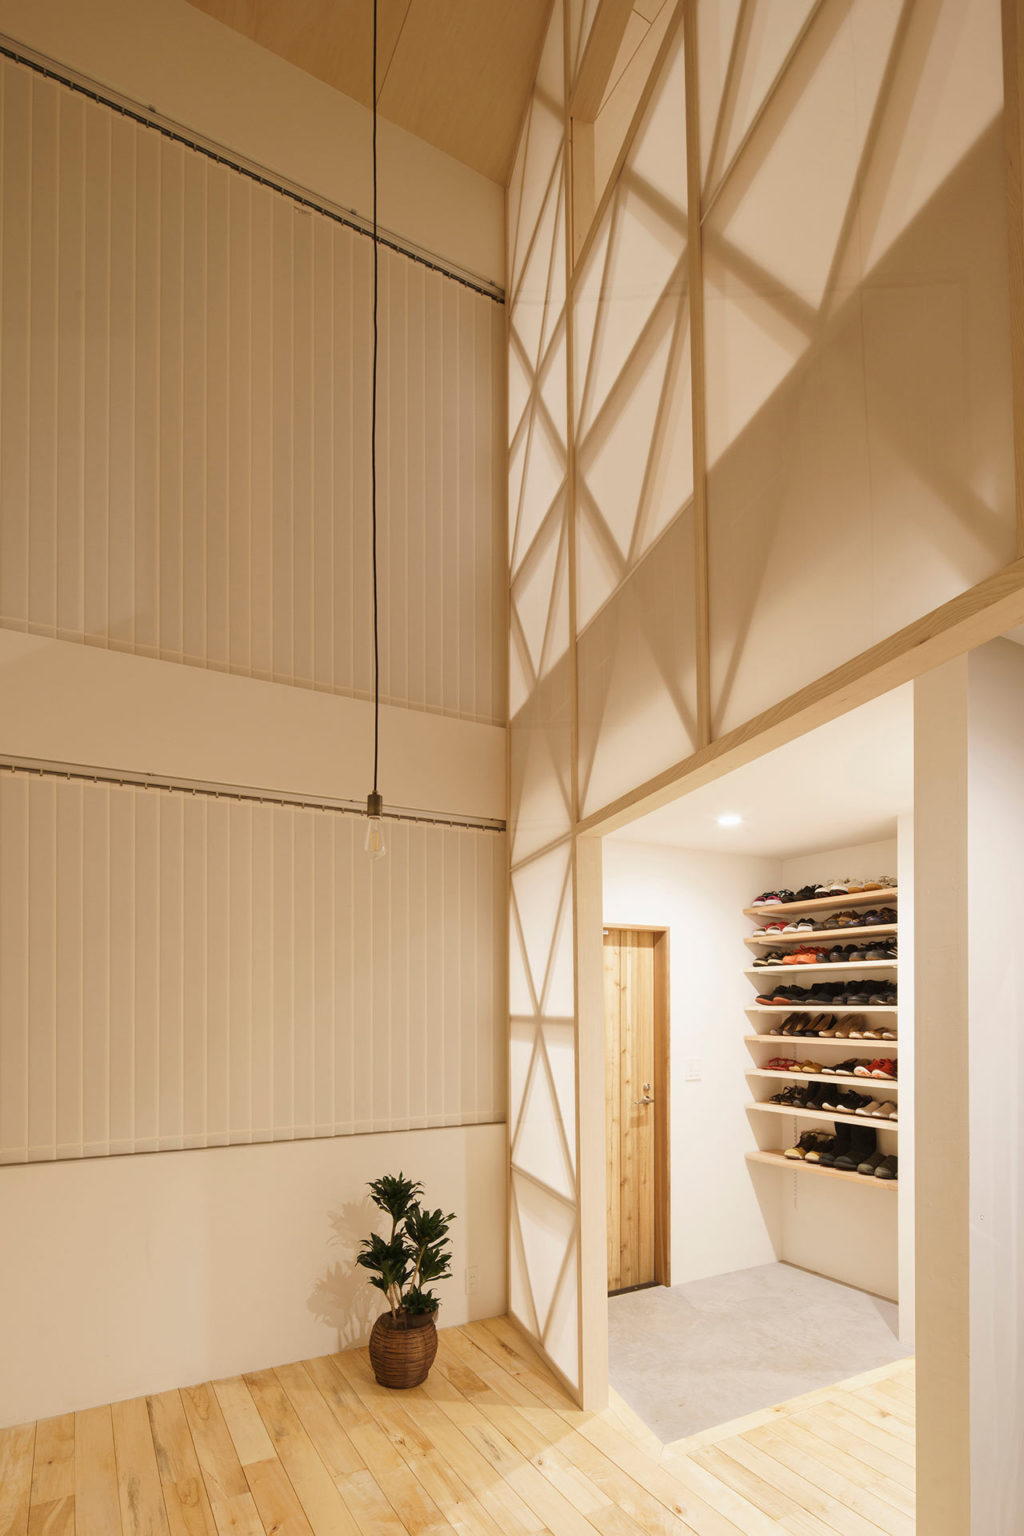 The entryway is clean and minimal, with open shelves for shoes and a rug